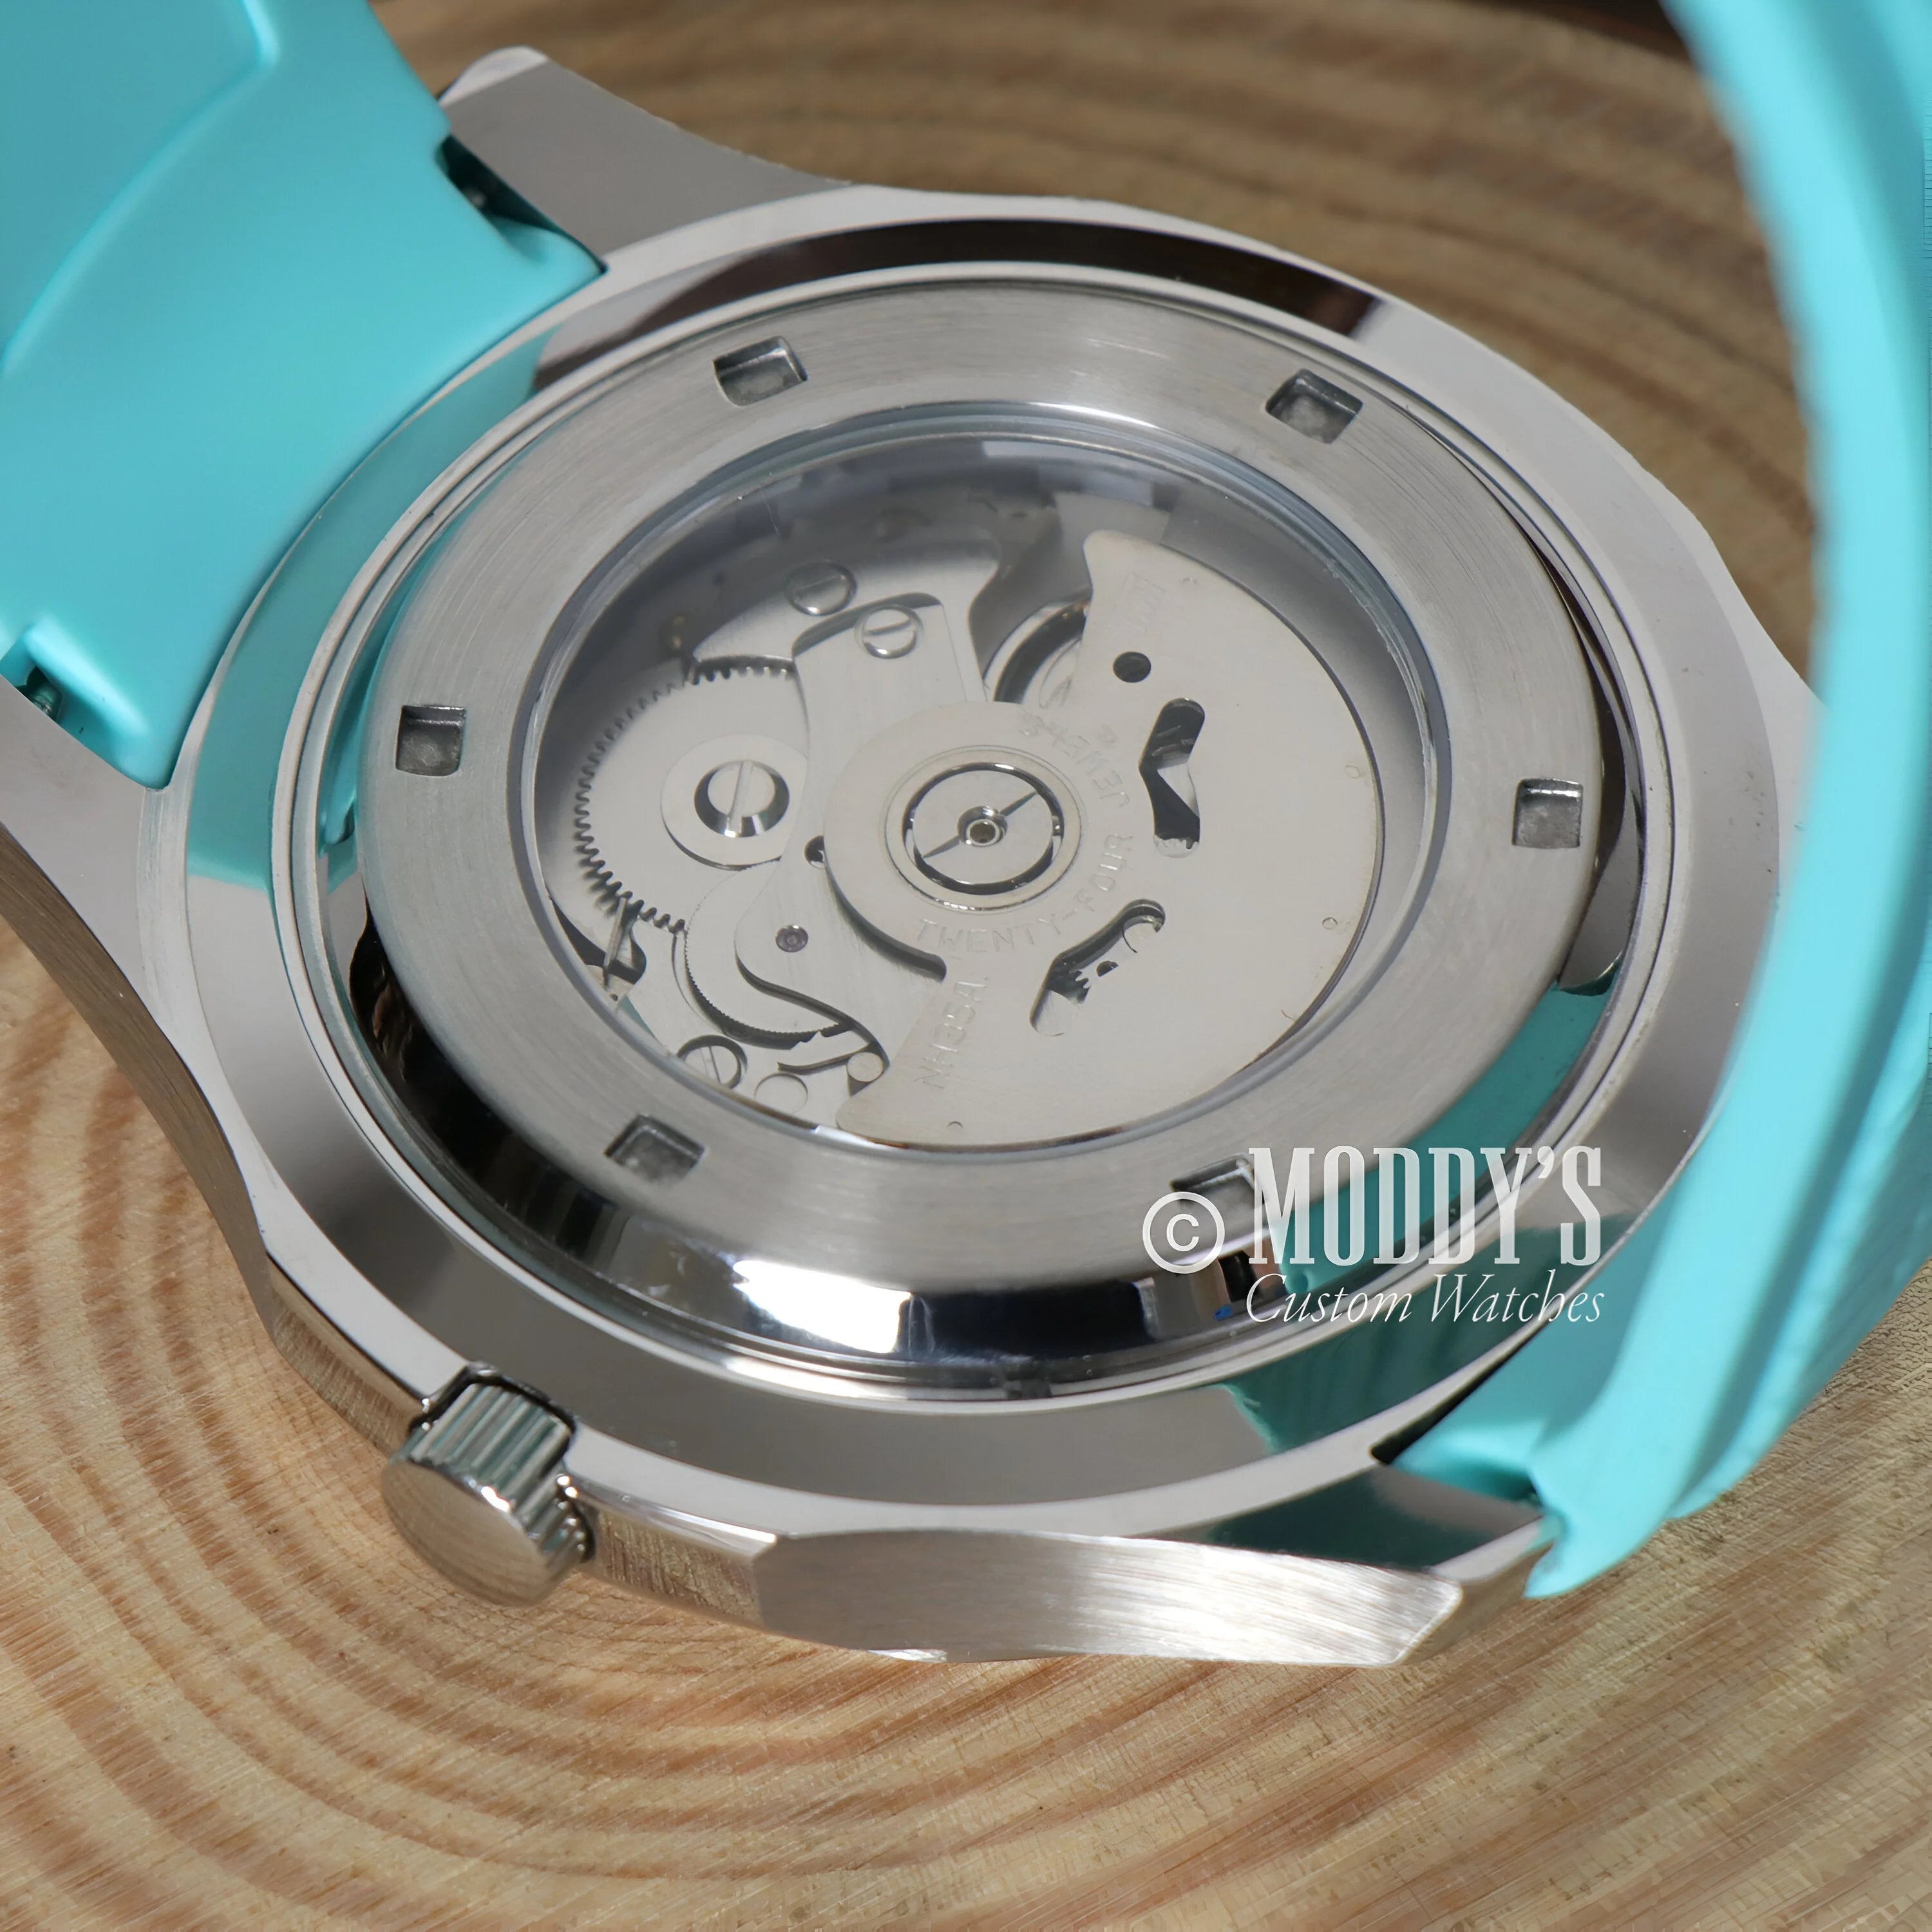 Seikonaut Tiffany Metallic Blue: Mod Aquanaut Watch With Turquoise Strap And Transparent Case Back